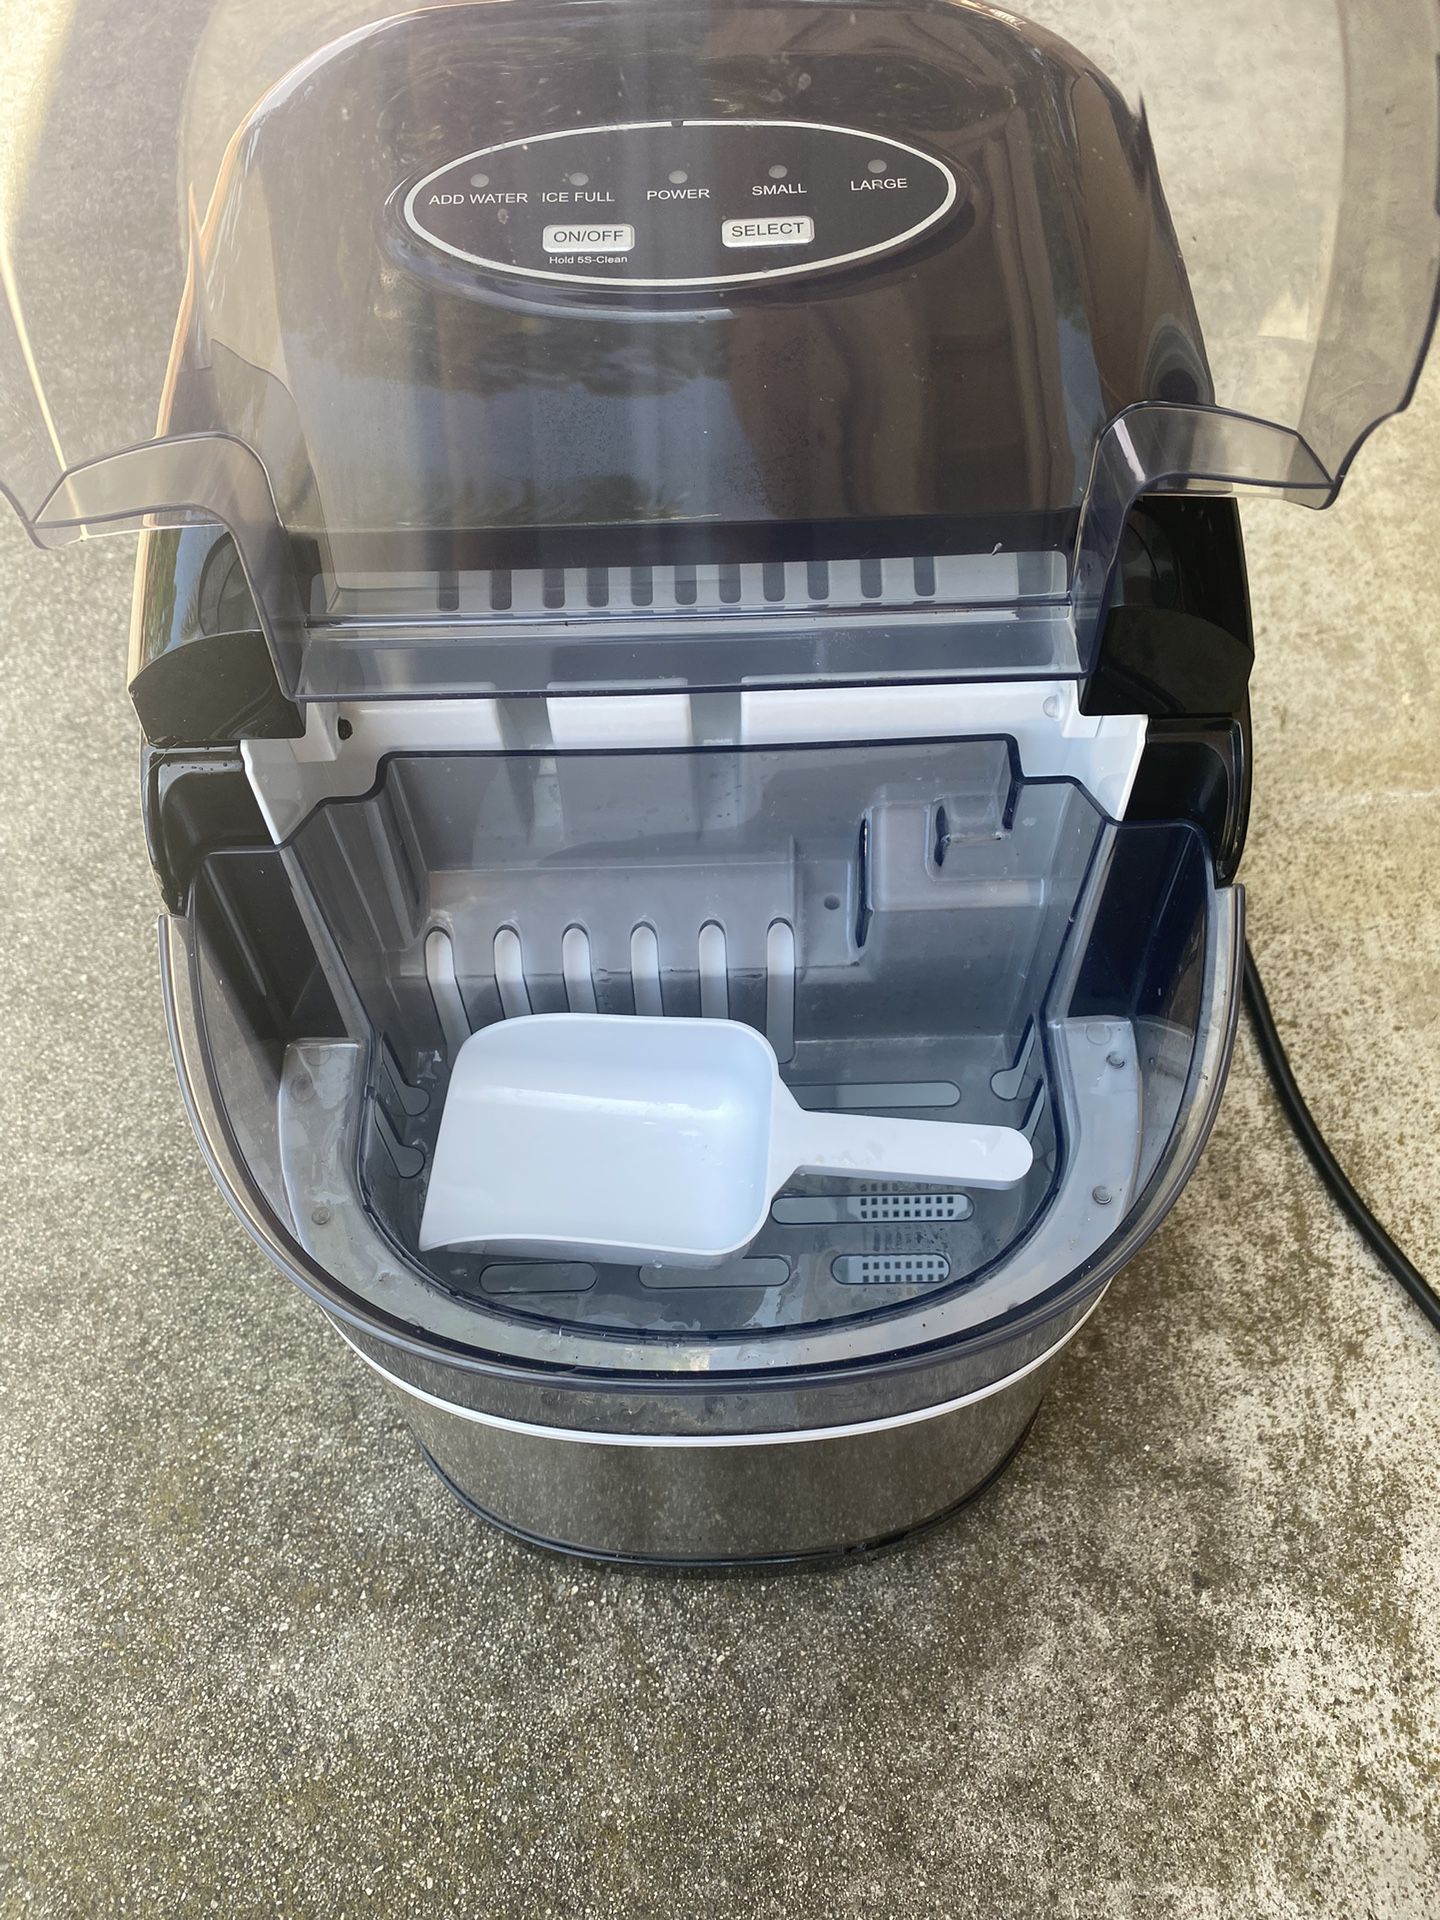 Insignia Ice Maker for Sale in Sanger, CA - OfferUp